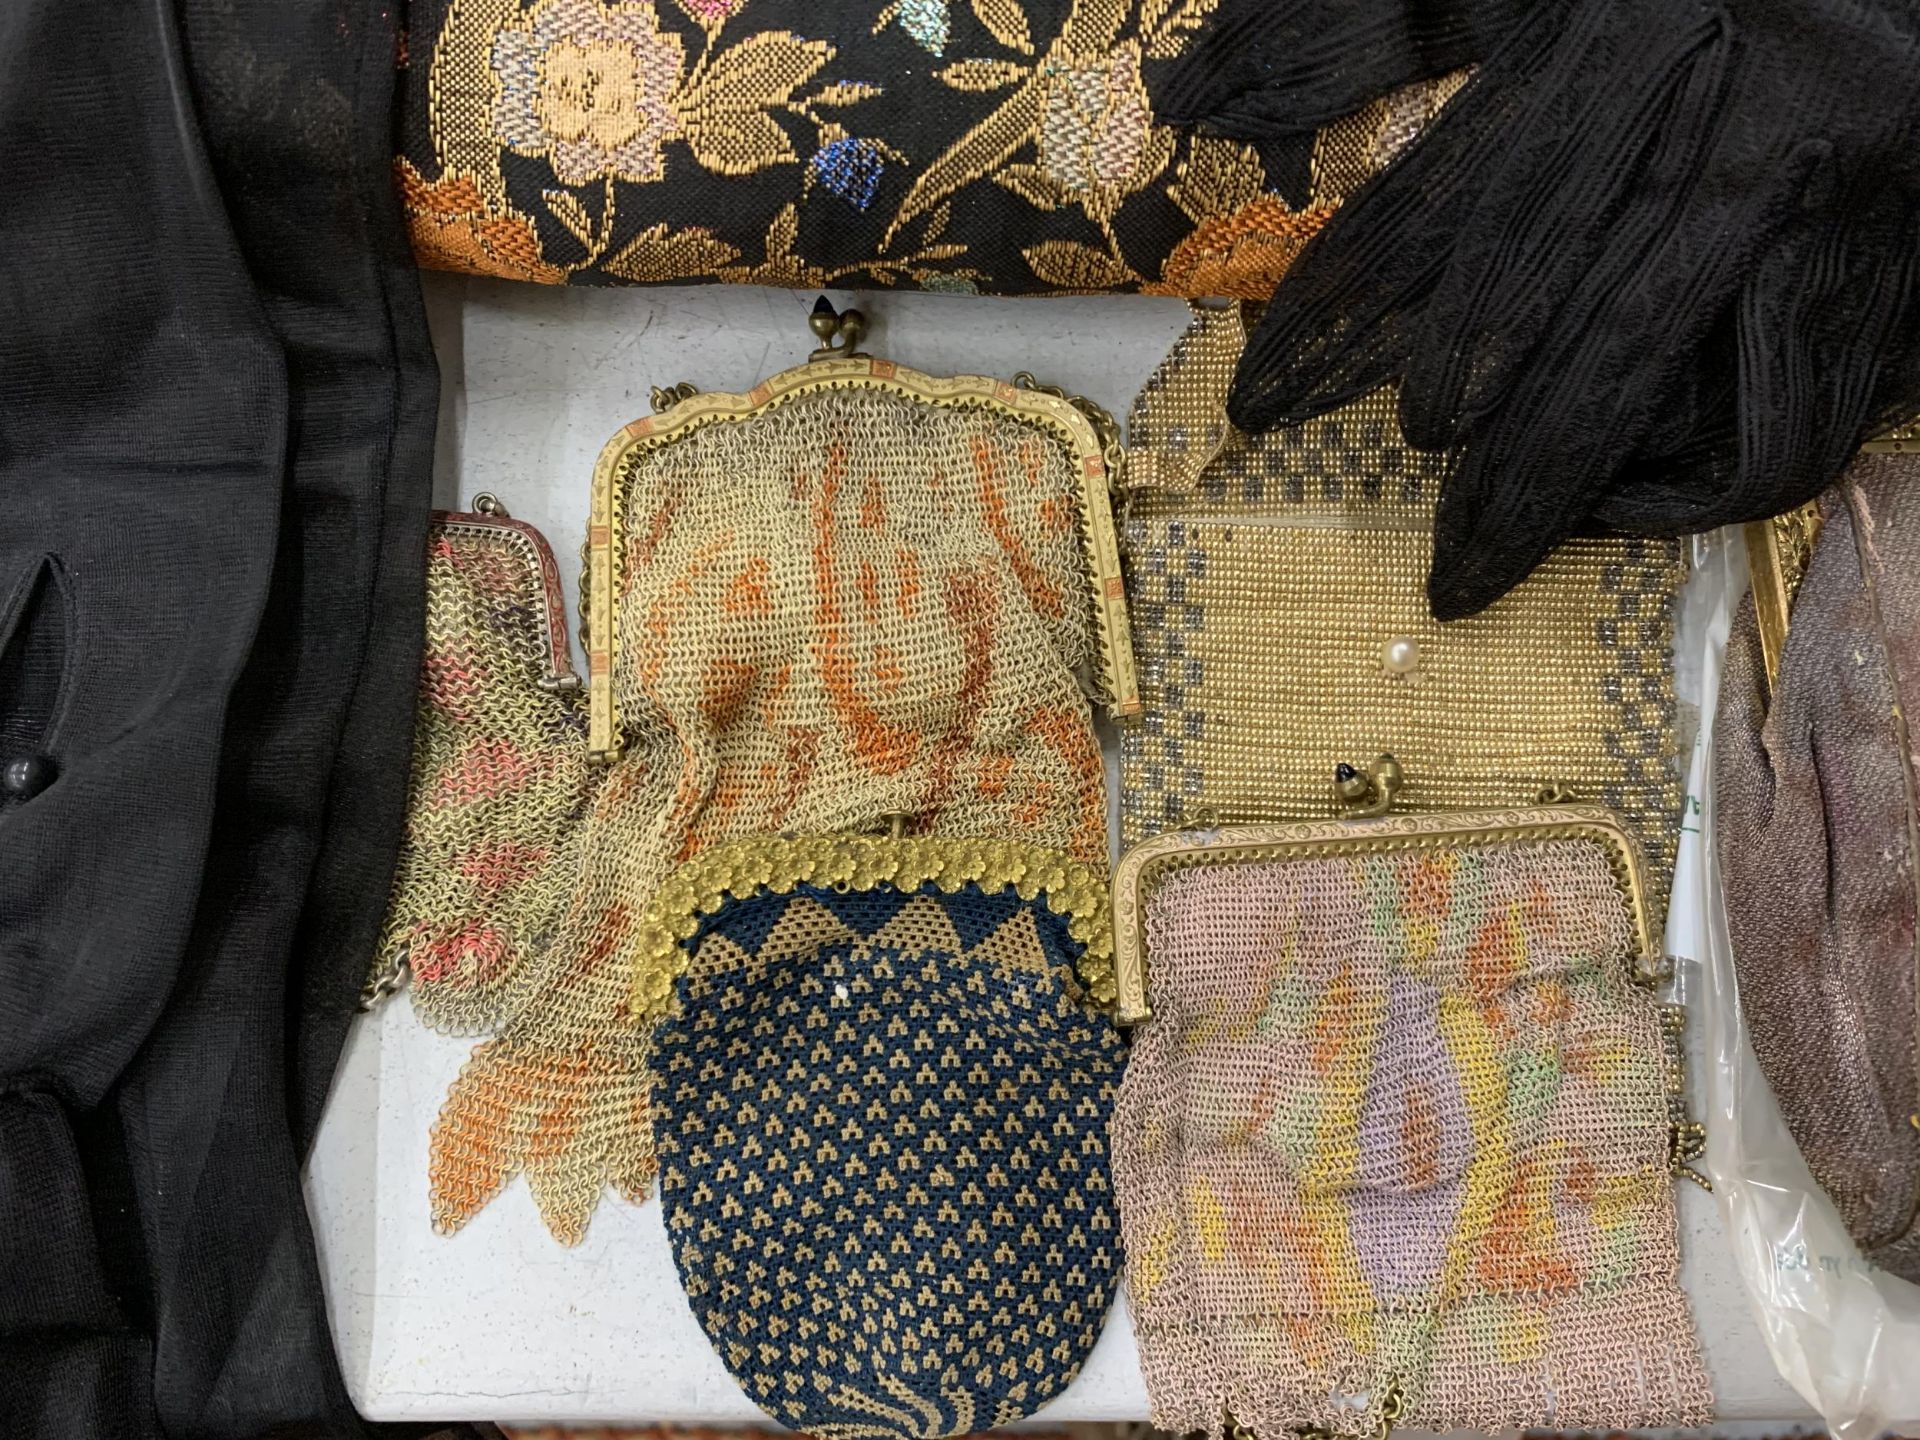 A MIXED GROUP OF VINTAGE PURSES, BAGS, TRINKET BOXES ETC - Image 3 of 5